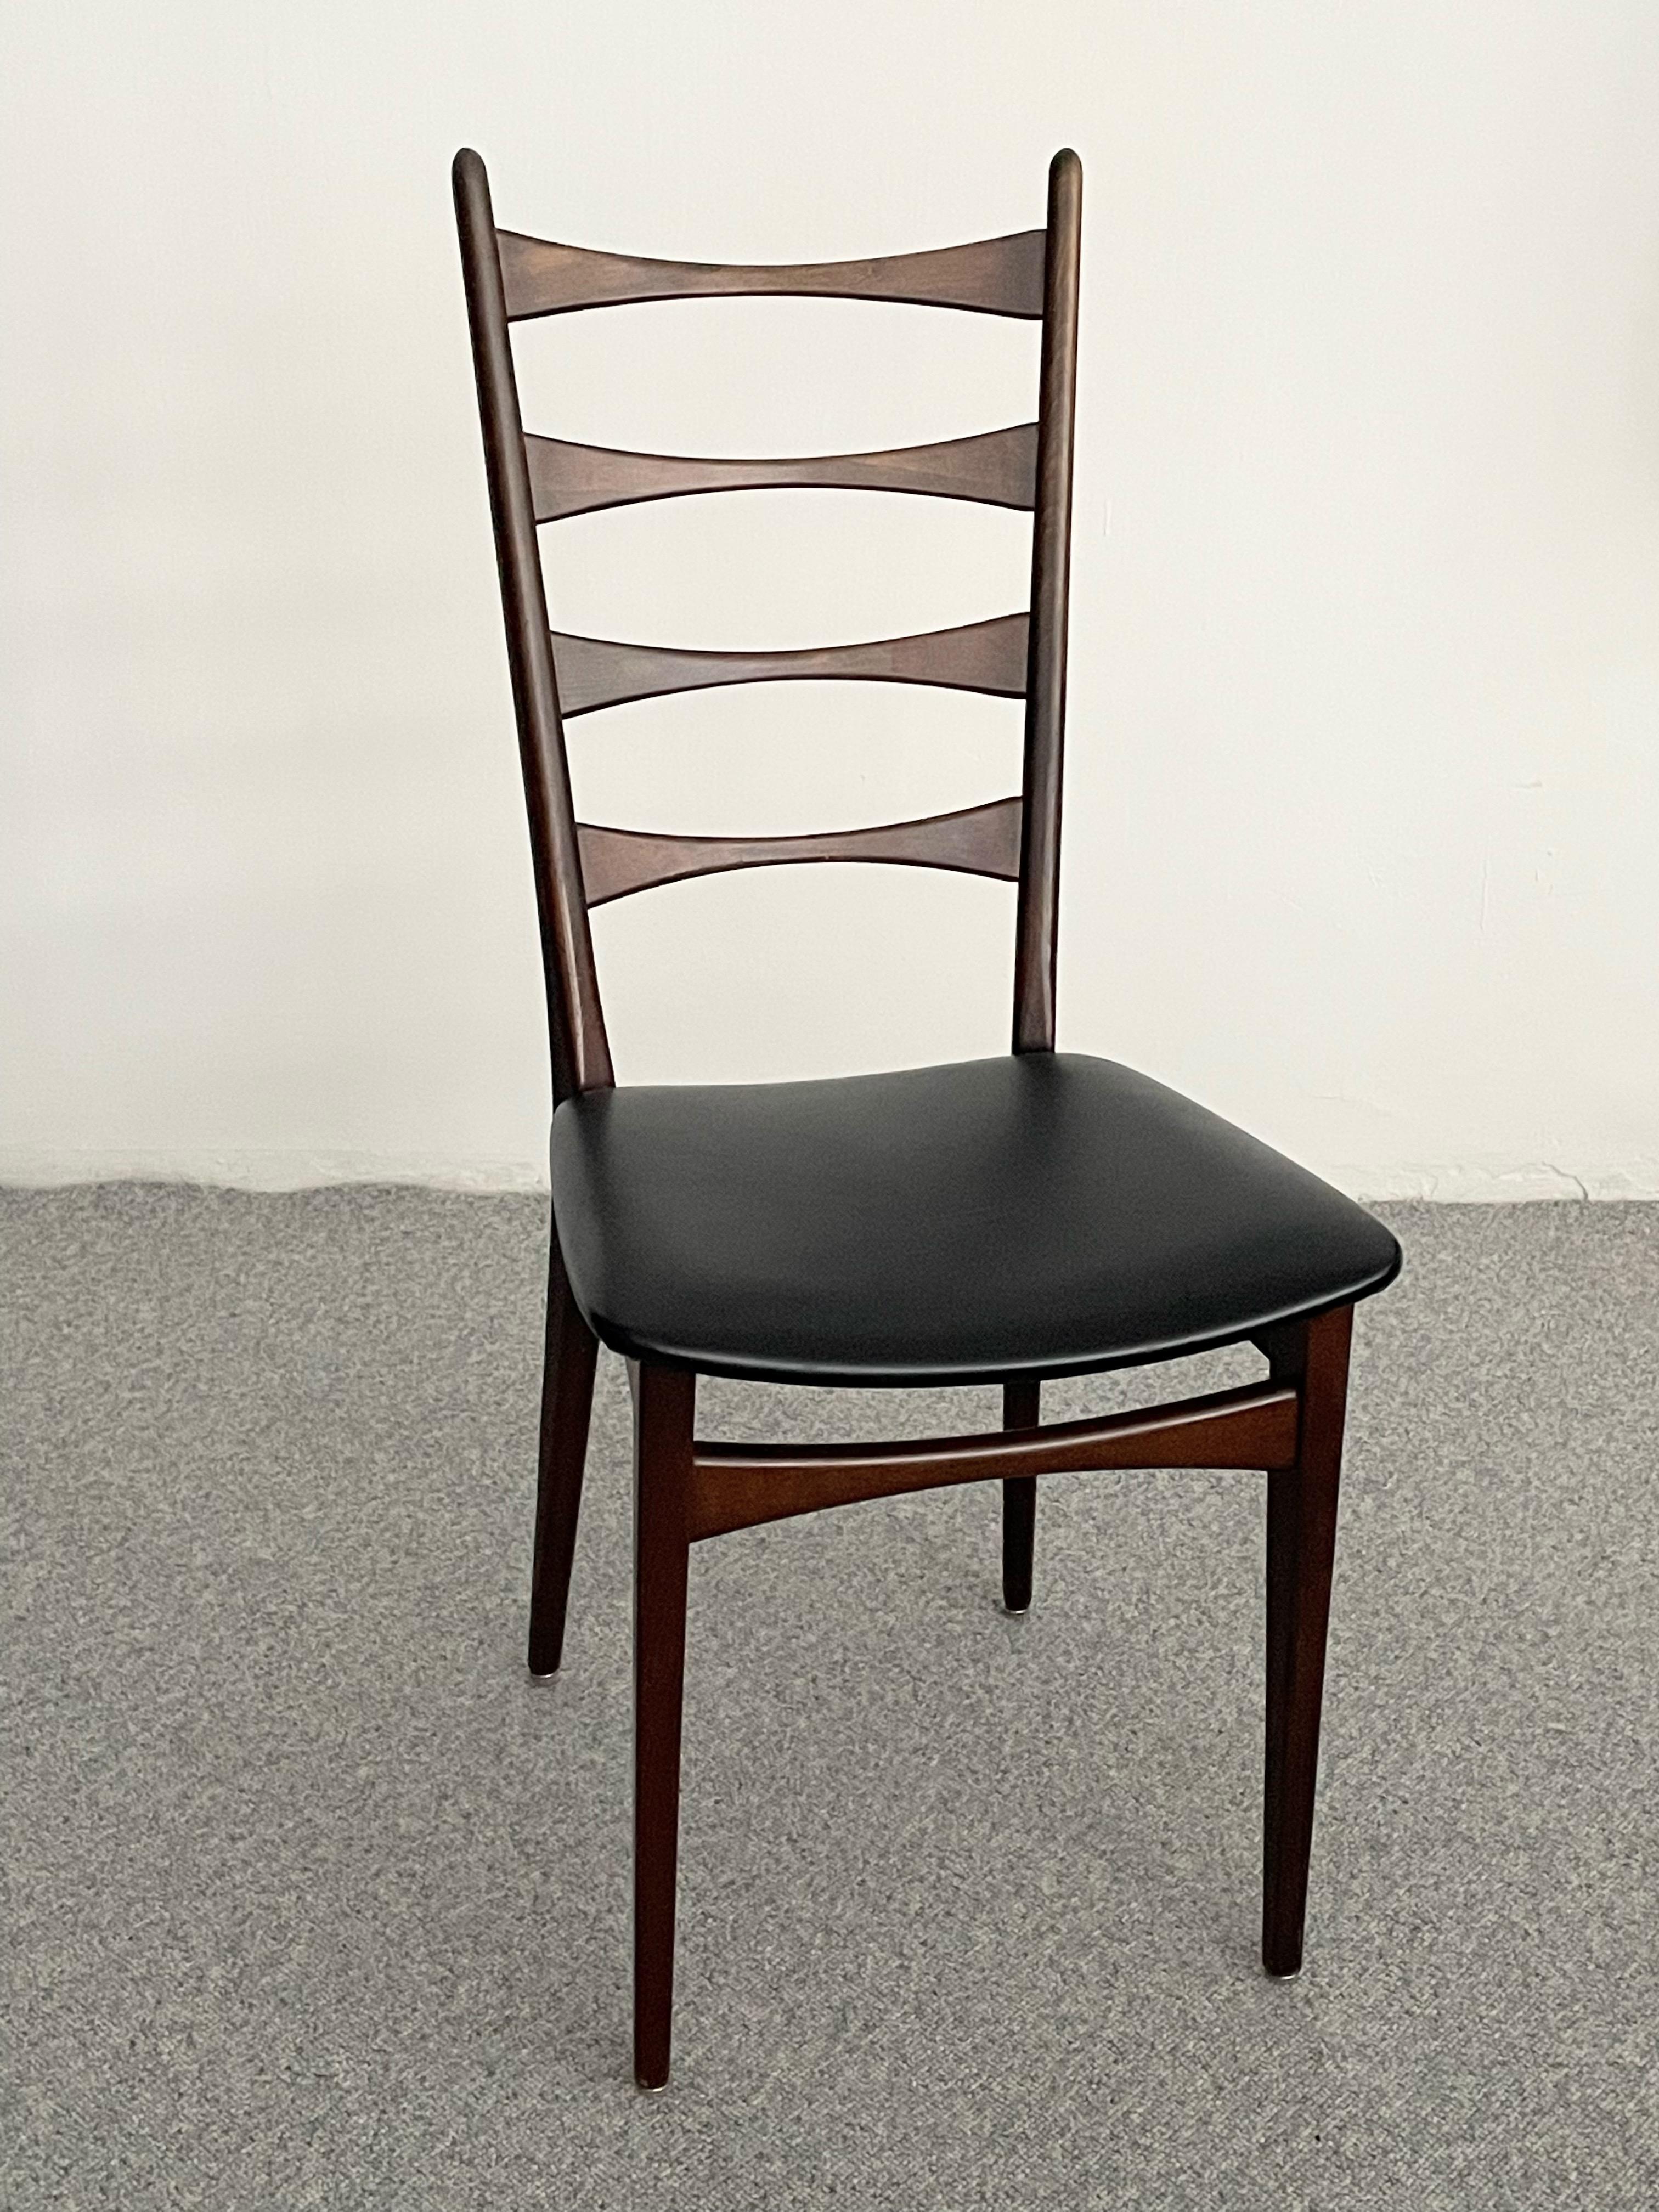 Set of six Mid-Century Modern Dining Chairs that have slatted bowtie design backs, solid wood bases and Faux leather covered seats. The high back provides comfort while giving an unique, clean stylish design. Overall Great Condition a few very tiny